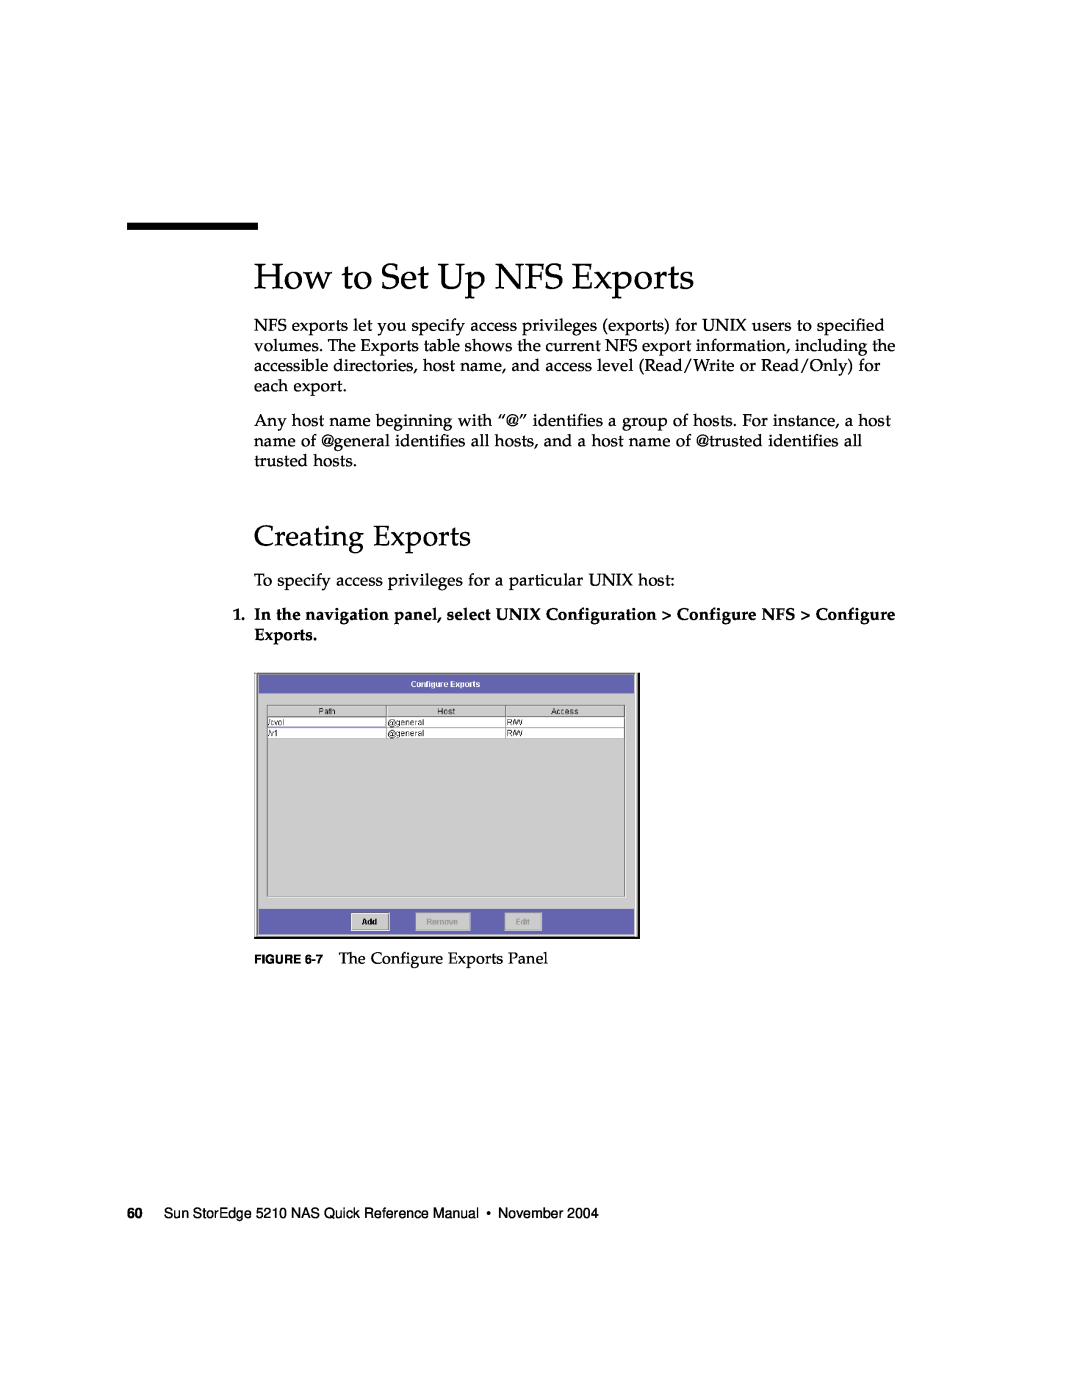 Sun Microsystems 5210 NAS manual How to Set Up NFS Exports, Creating Exports 